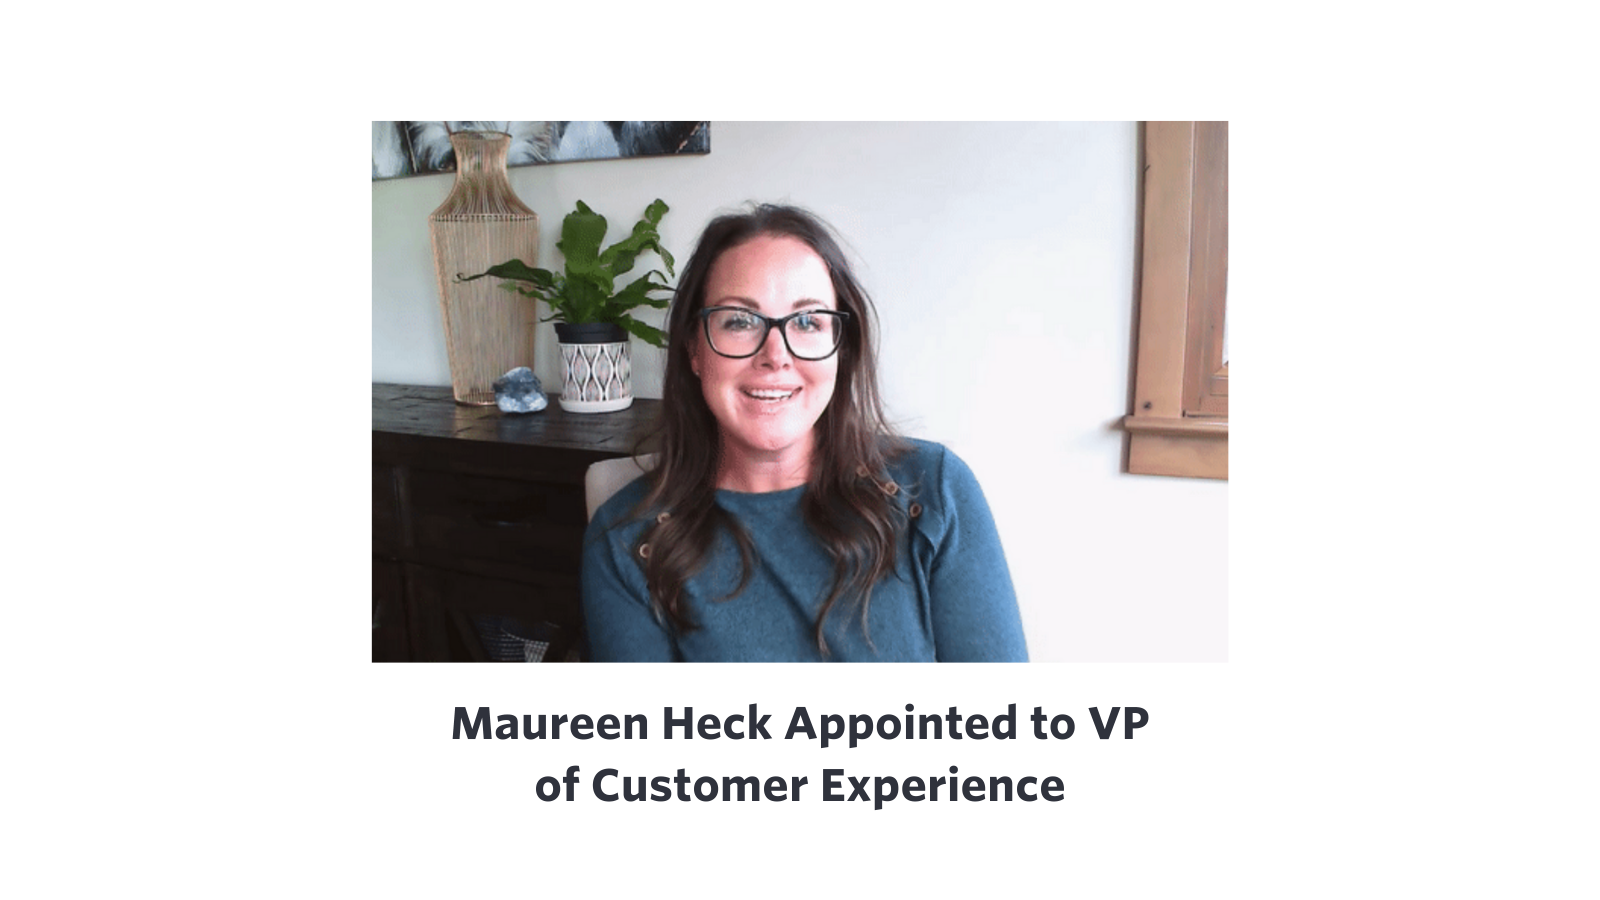 Maureen Heck appointed to VP of Customer Experience